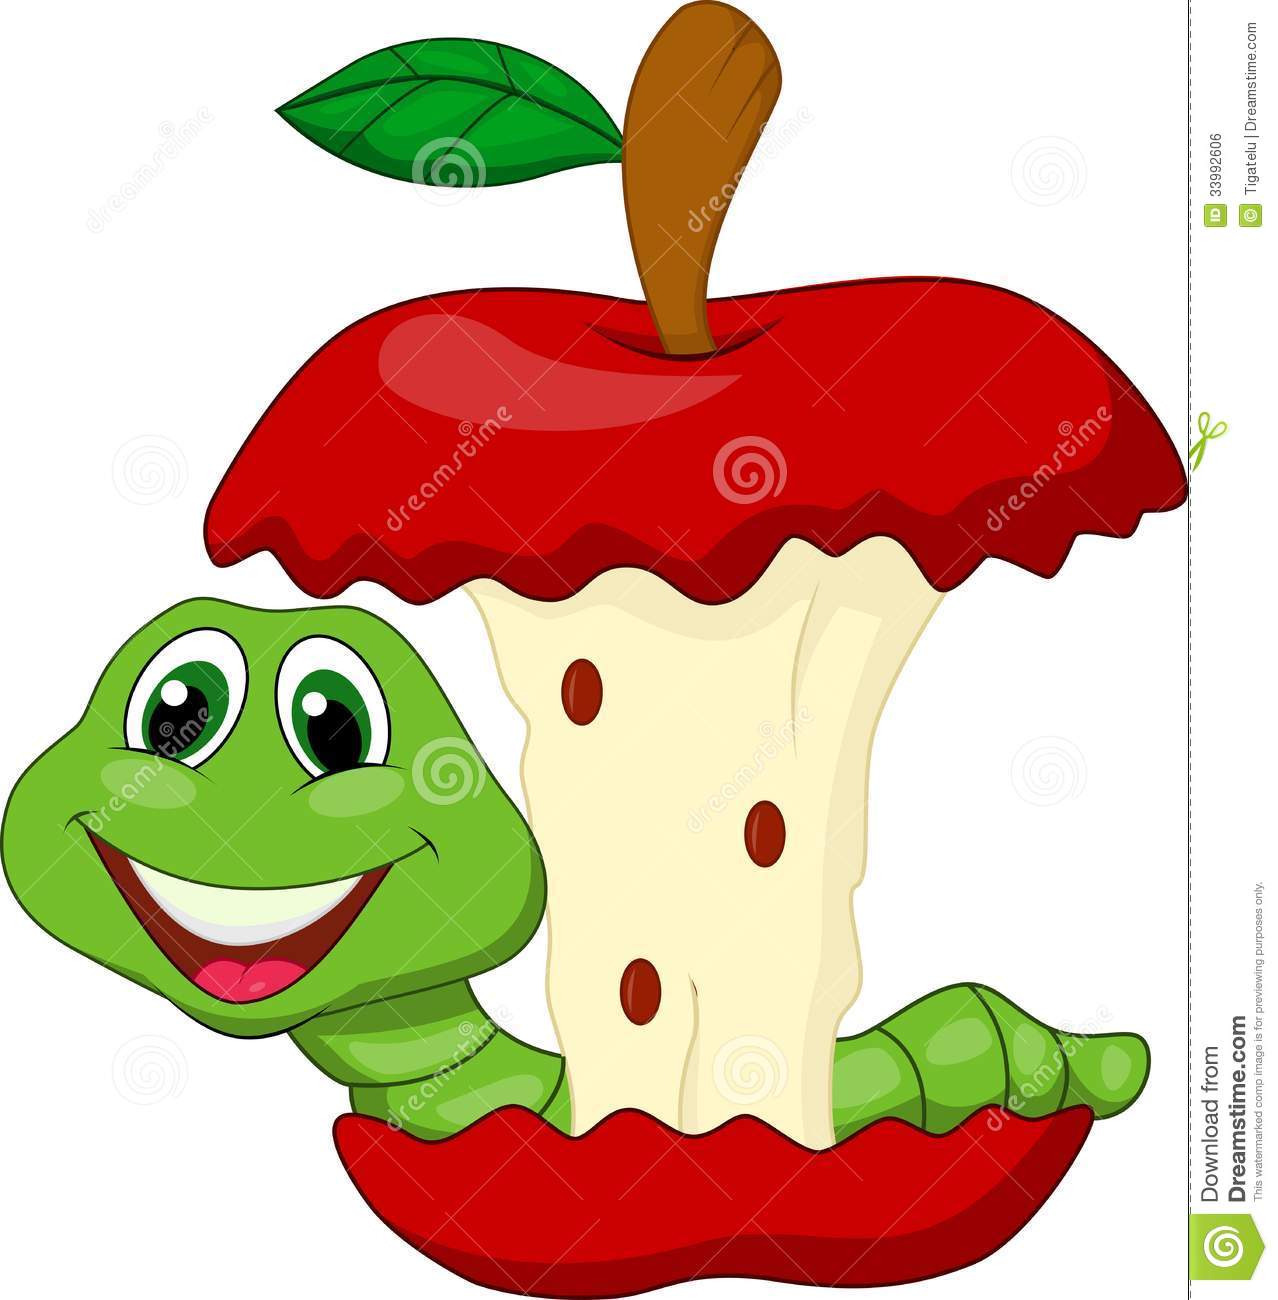 Worm Eating Red Apple Cartoon Royalty Free Stock Image   Image    